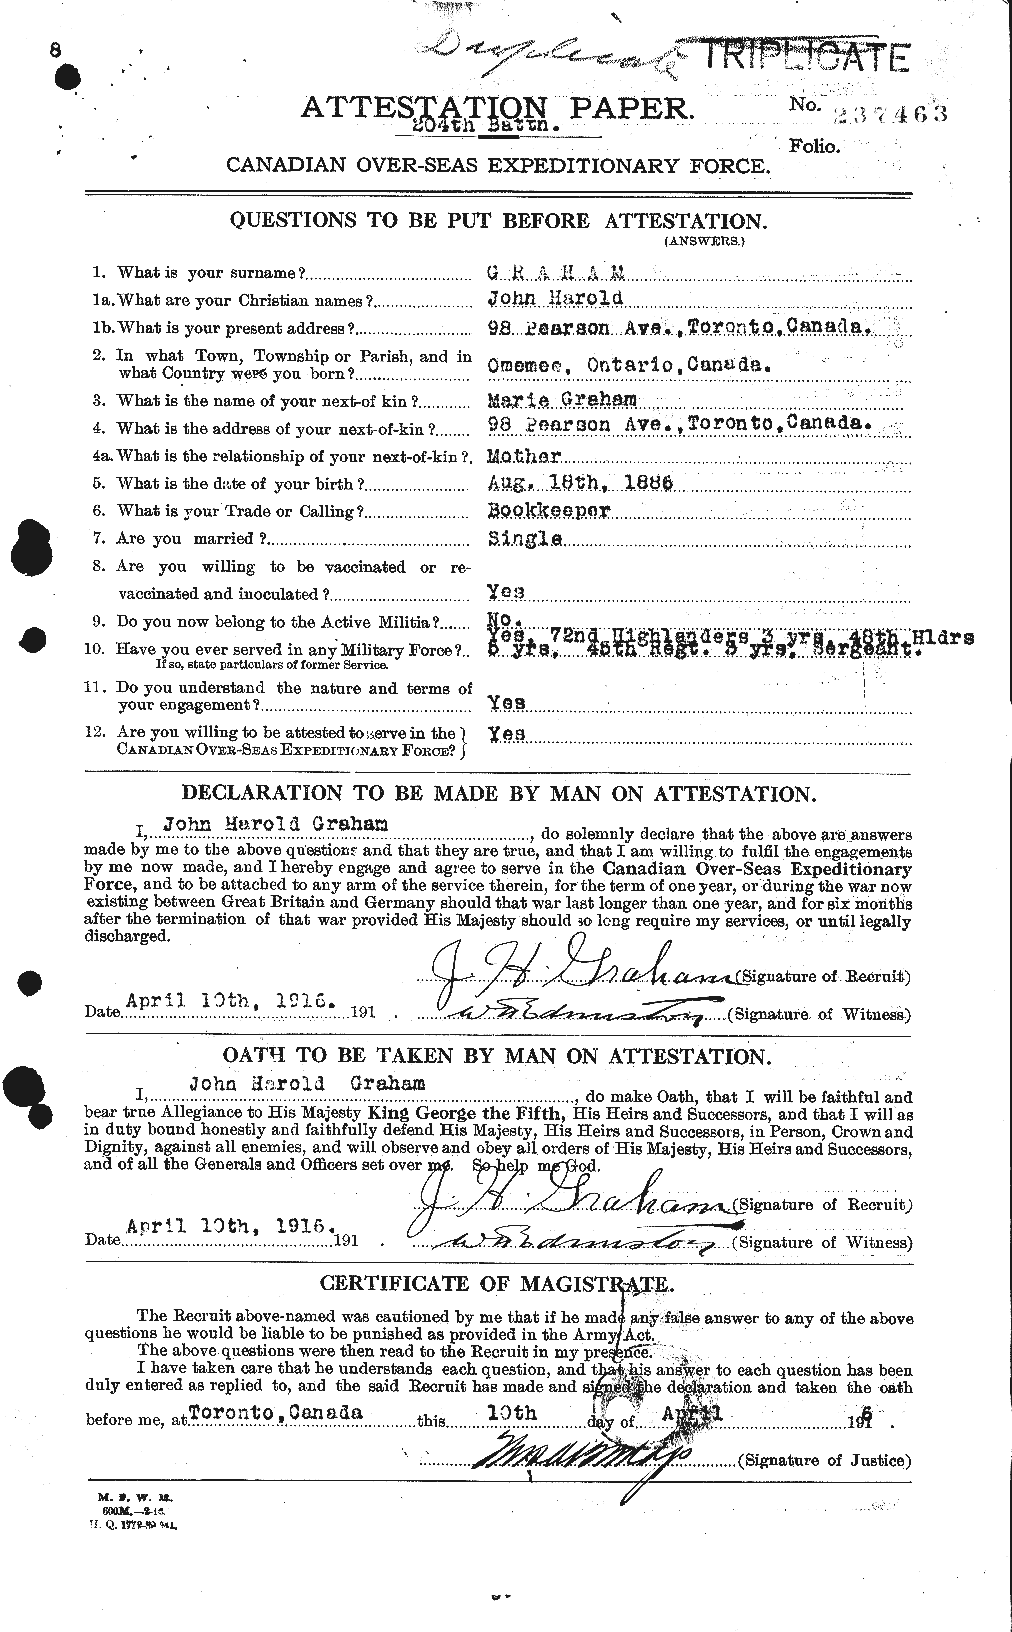 Personnel Records of the First World War - CEF 359178a